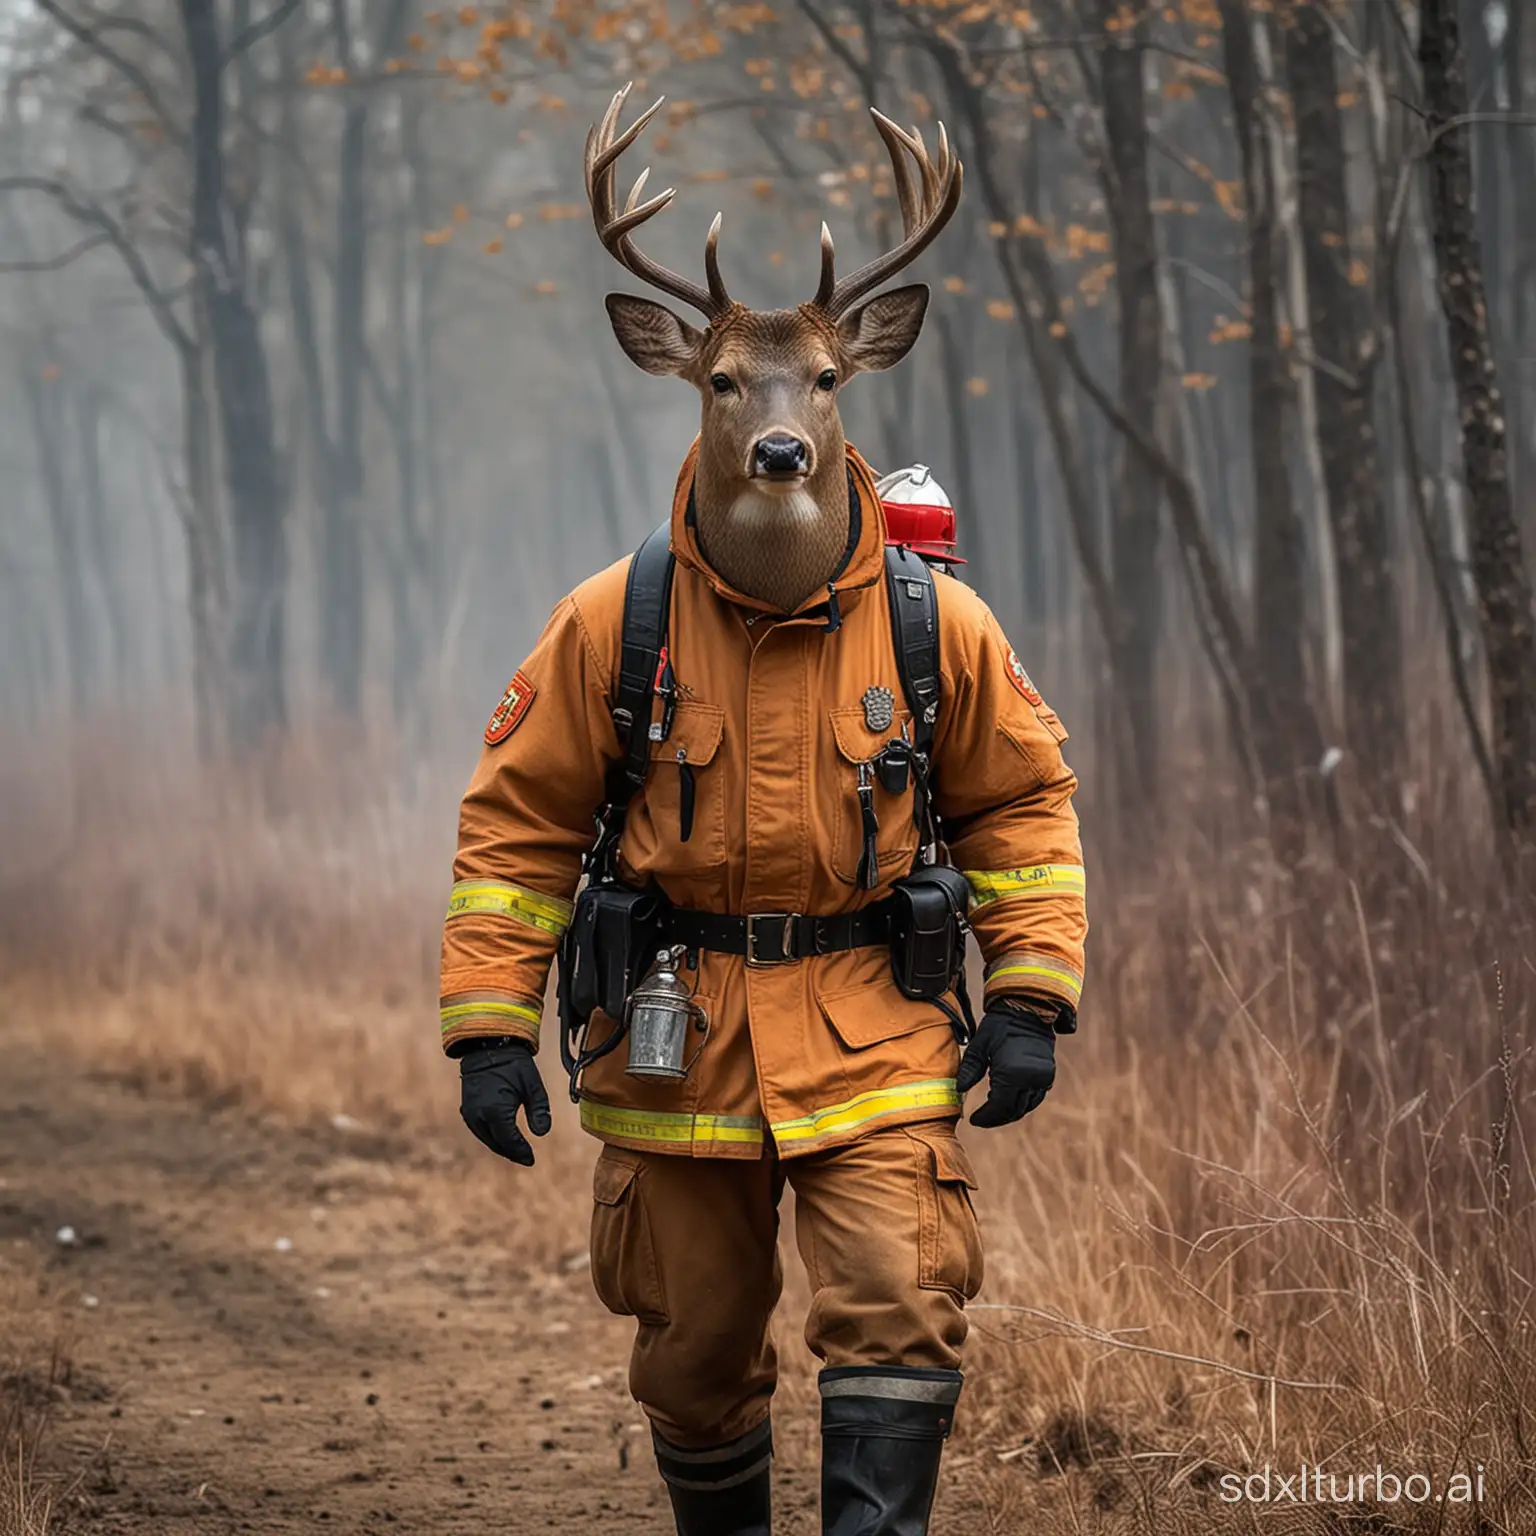 Deer-Firefighter-in-Action-Courageous-Animal-Fighting-Flames